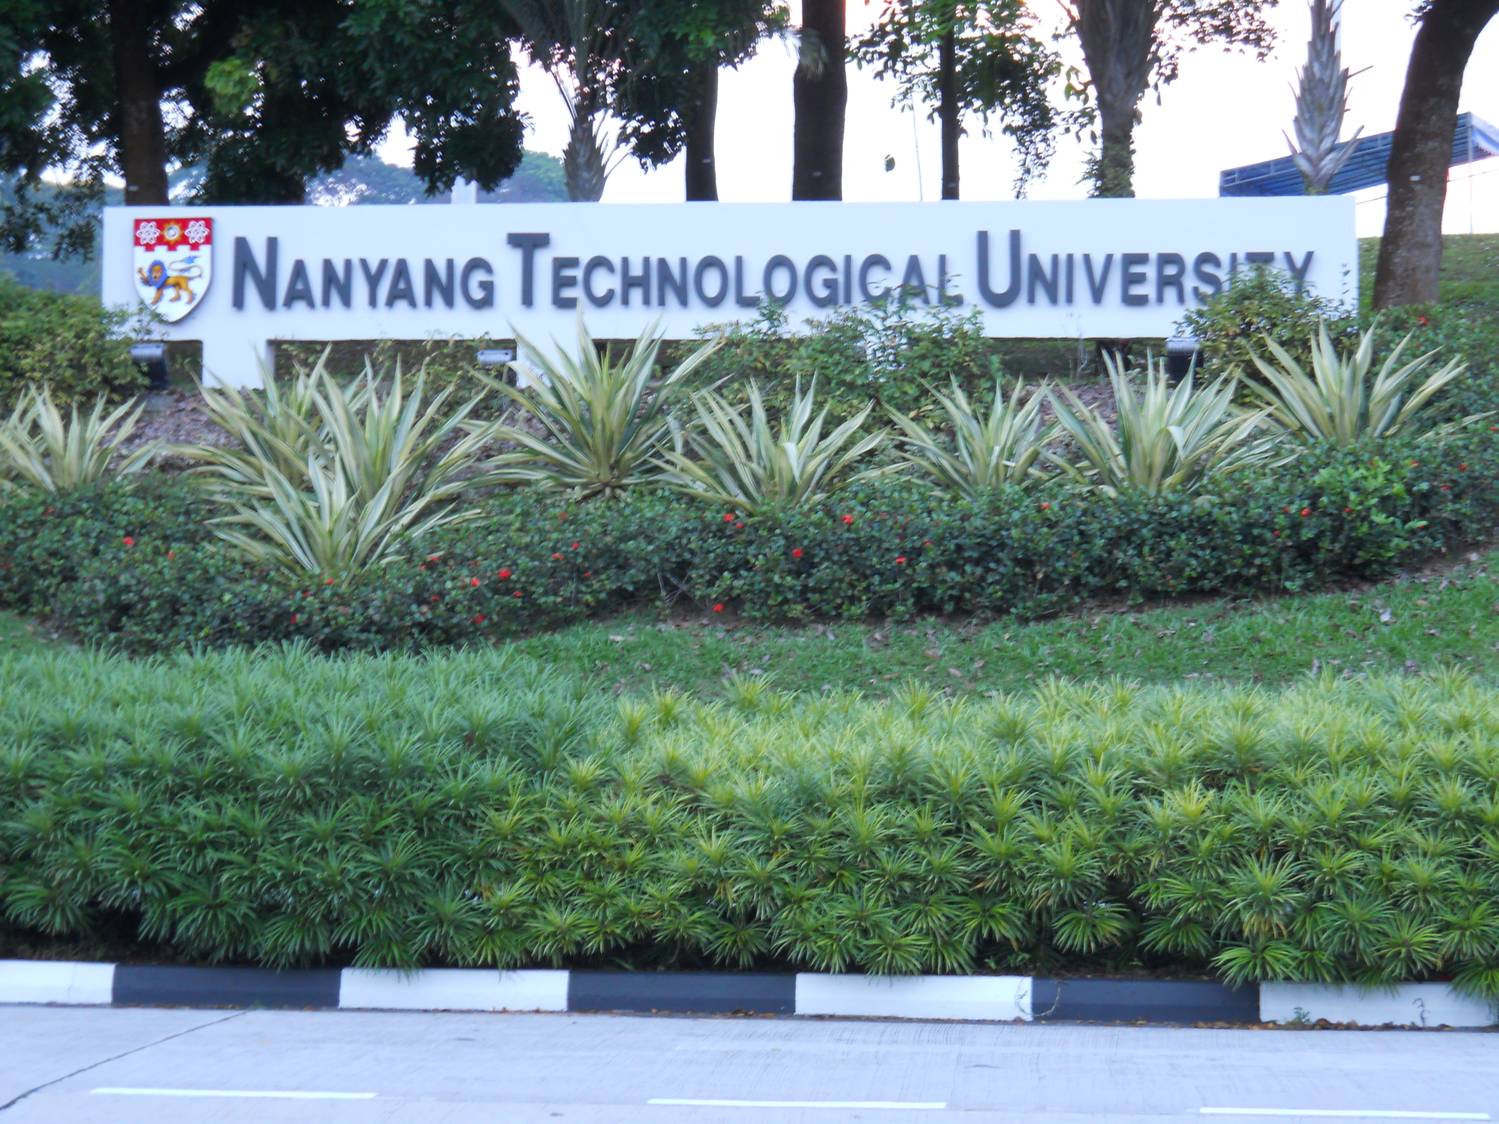 Picture:  Eastern gate to Nanyang Technological University, Singapore